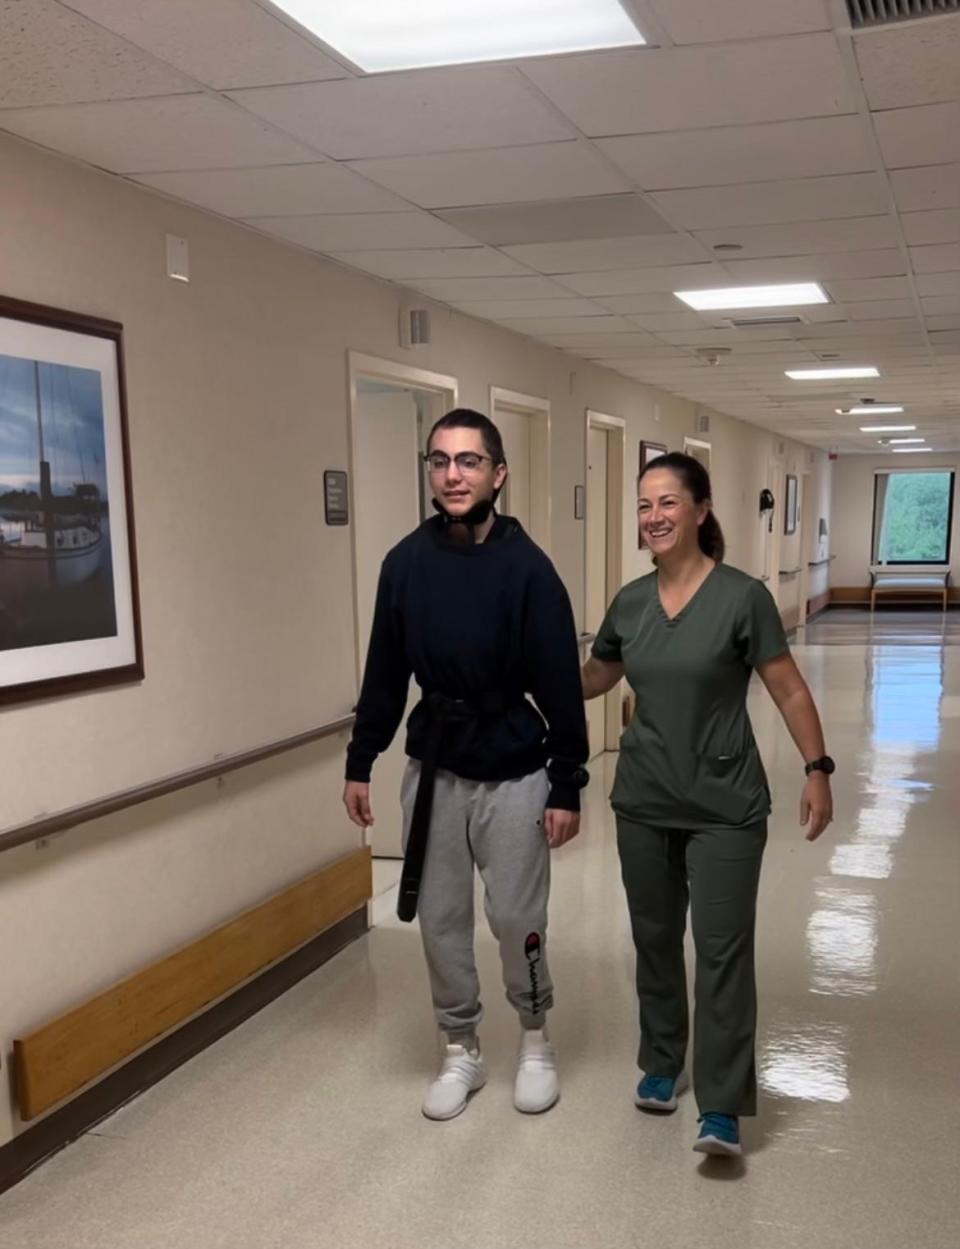 Lawton Chiles High School senior Owen Horton walks with a caregiver. He will be graduating May 25, 2023 after undergoing a critical recovery journey in the past several months due to severe injuries from a single-vehicle car crash.